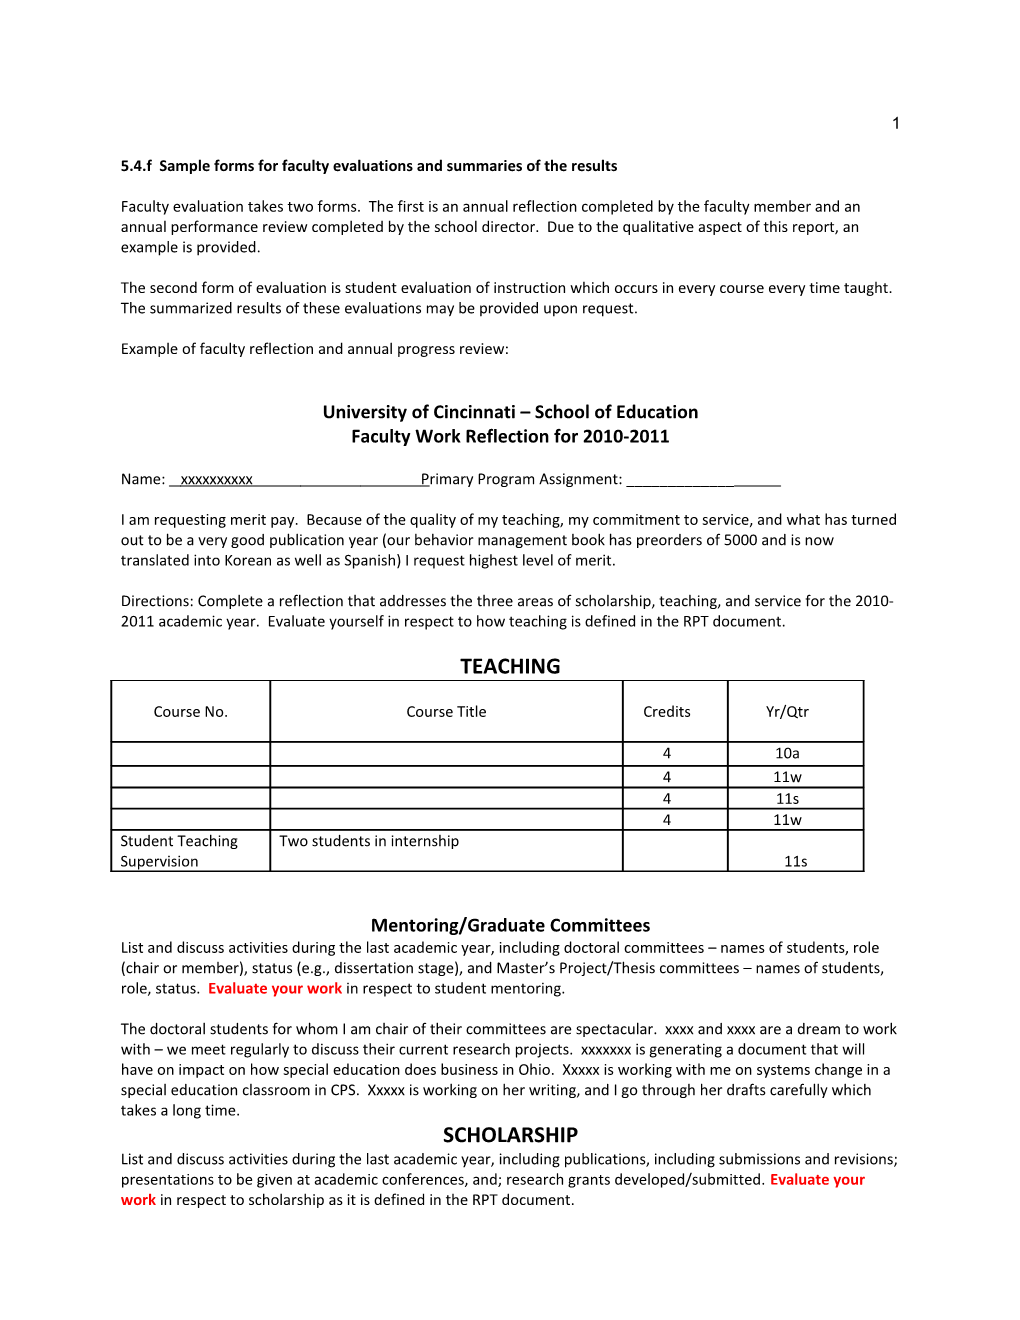 5.4.F Sample Forms for Faculty Evaluations and Summaries of the Results